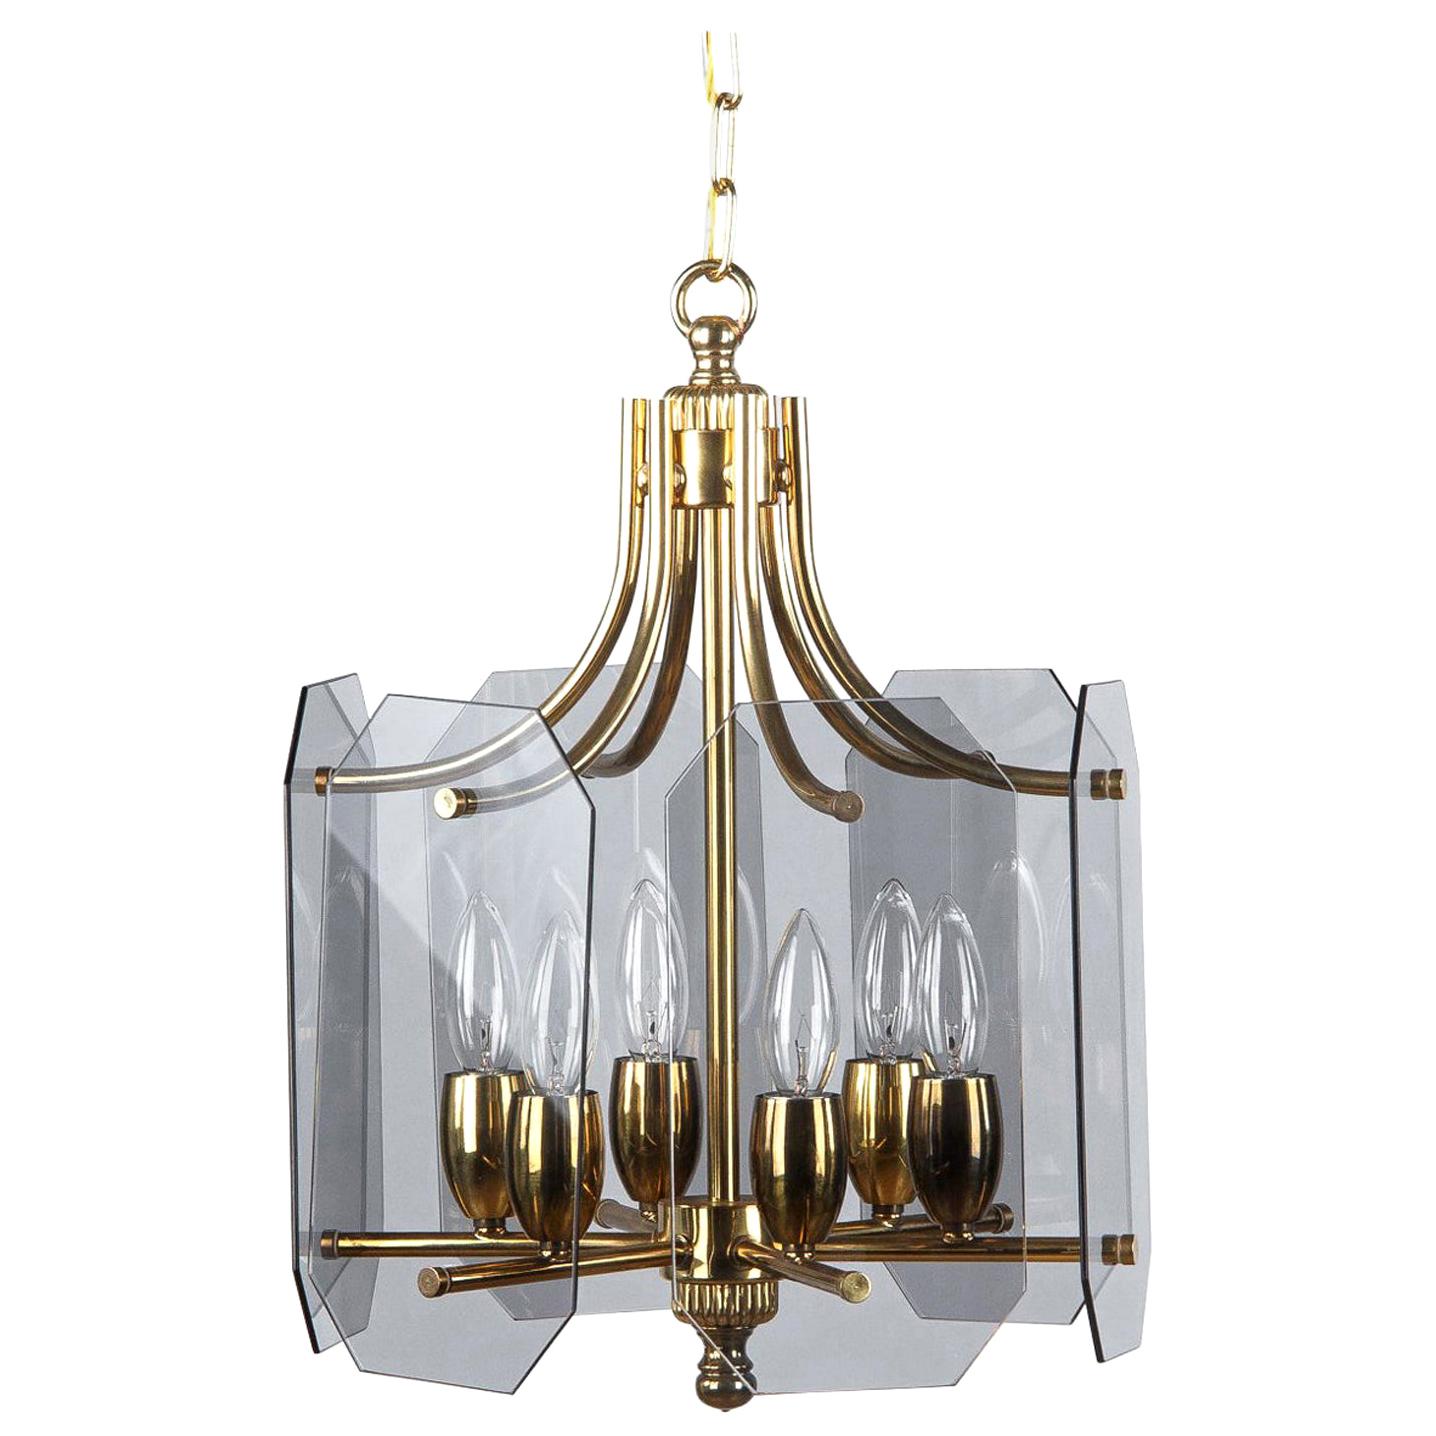 Midcentury French Brass Chandelier with Smoked Glass Panels, 1960s